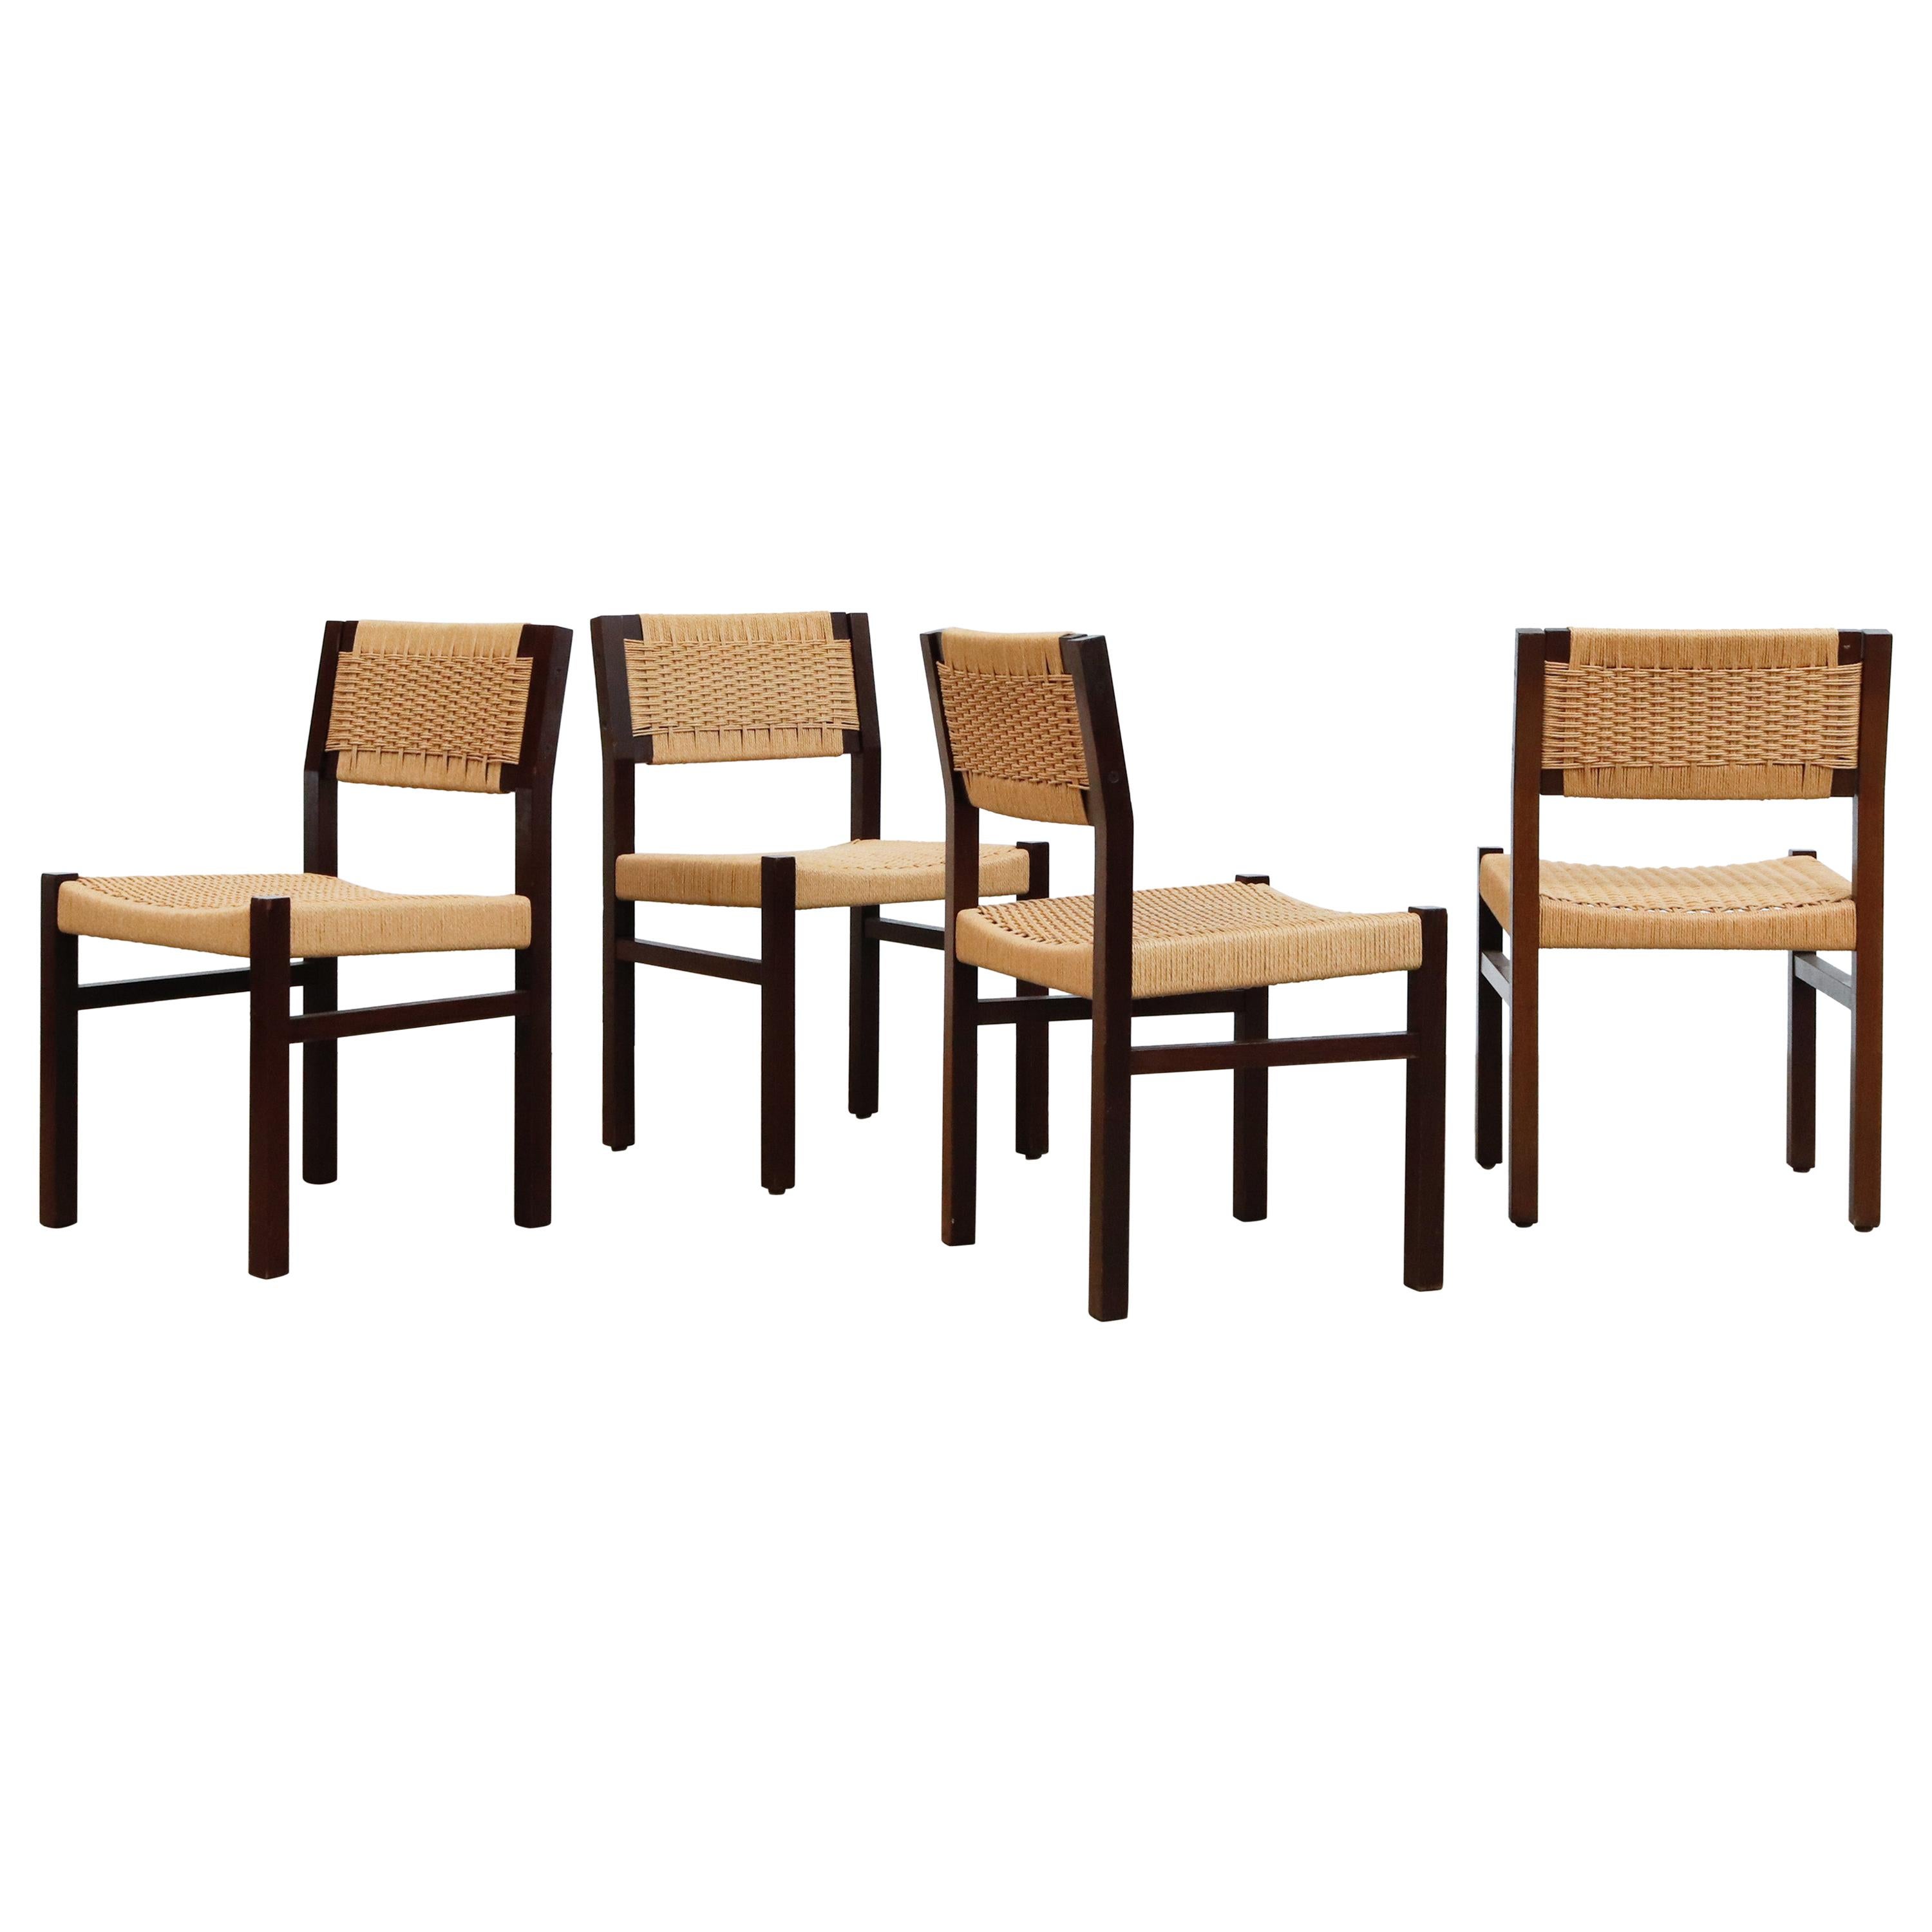 Set of 4 Wenge & Papercord Dining Chairs by Arnold Merckx for Fristho, 1973